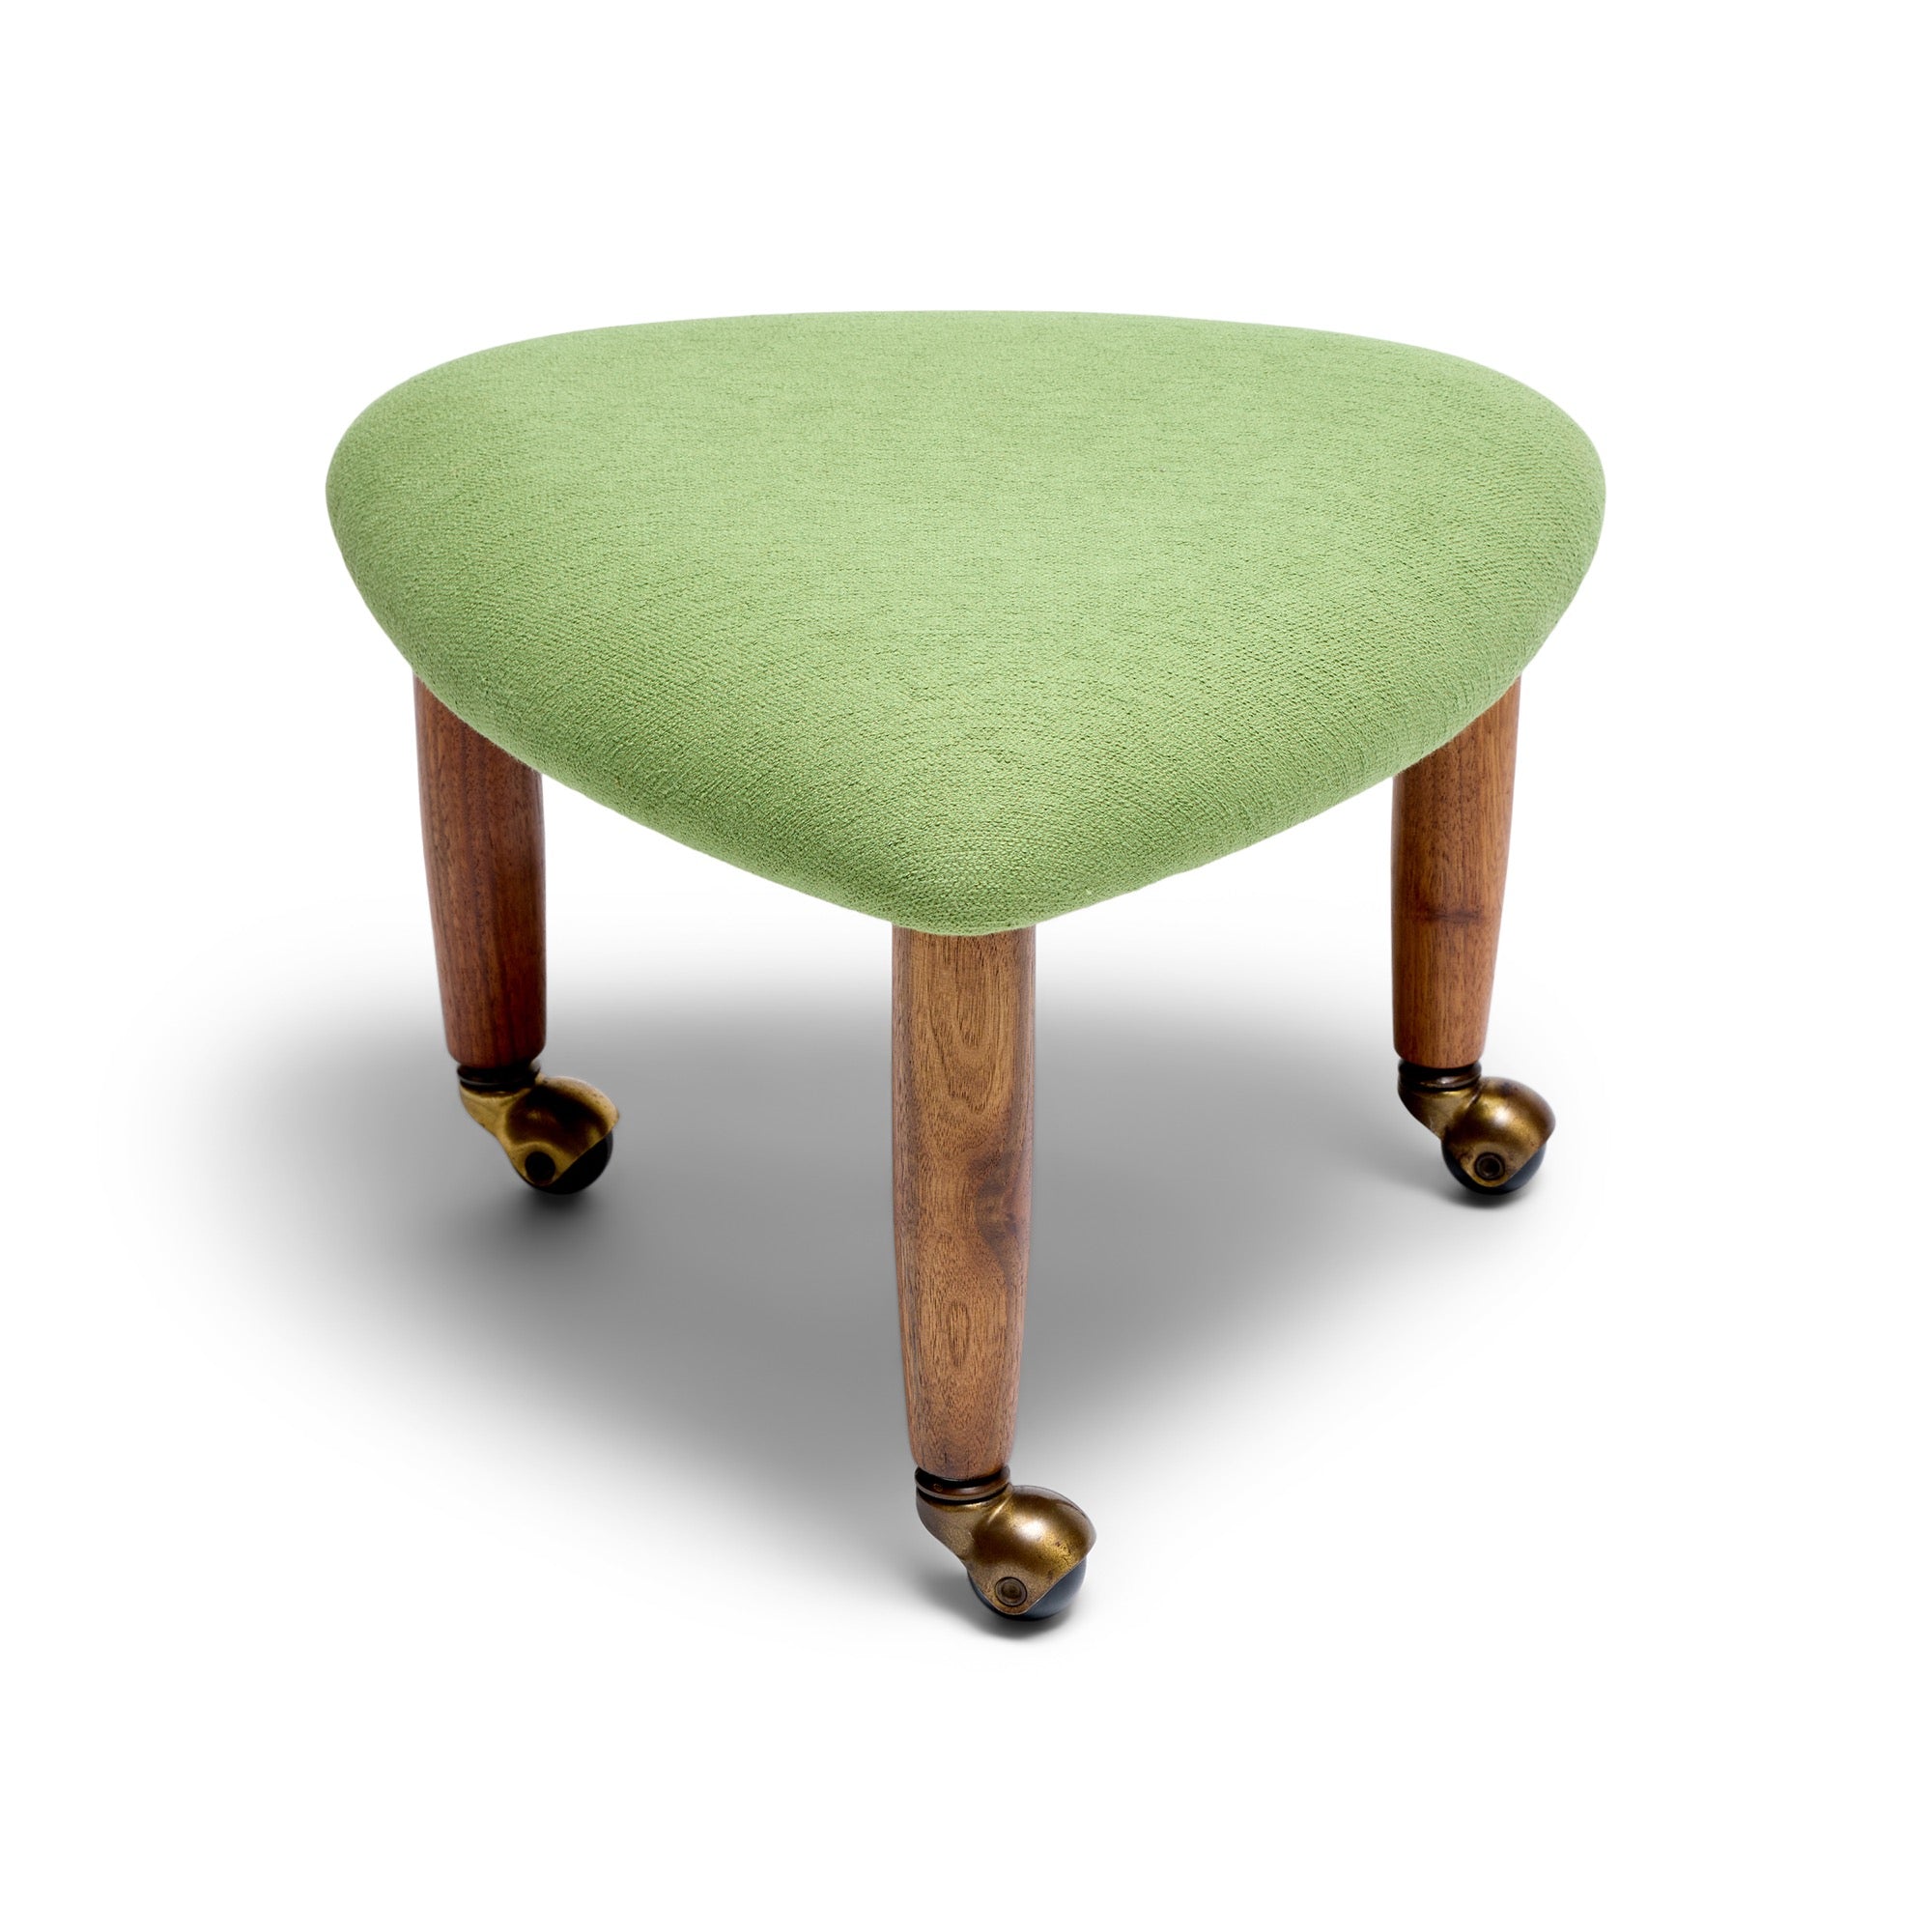 Trifecta Rolling Stool by Adrian Pearsall for Craft Associates